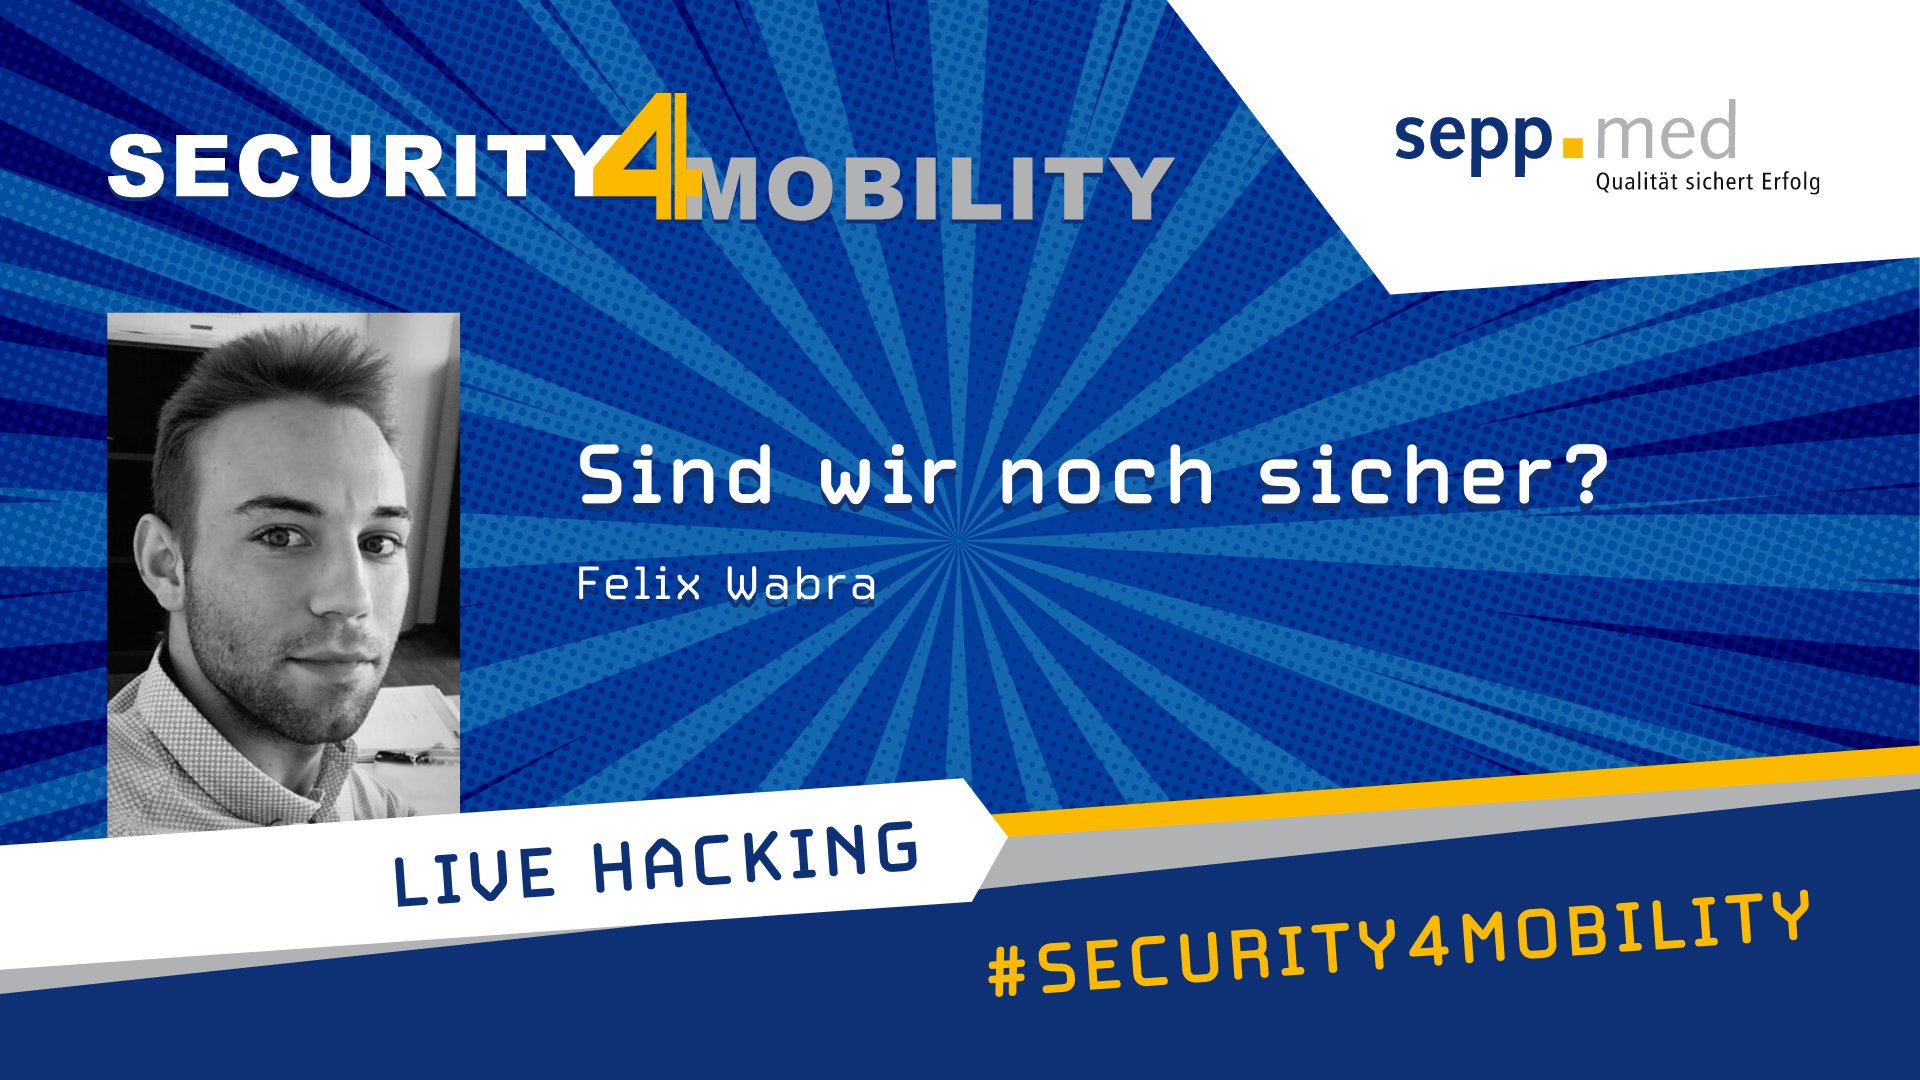 security4mobility livehacking thumbnail